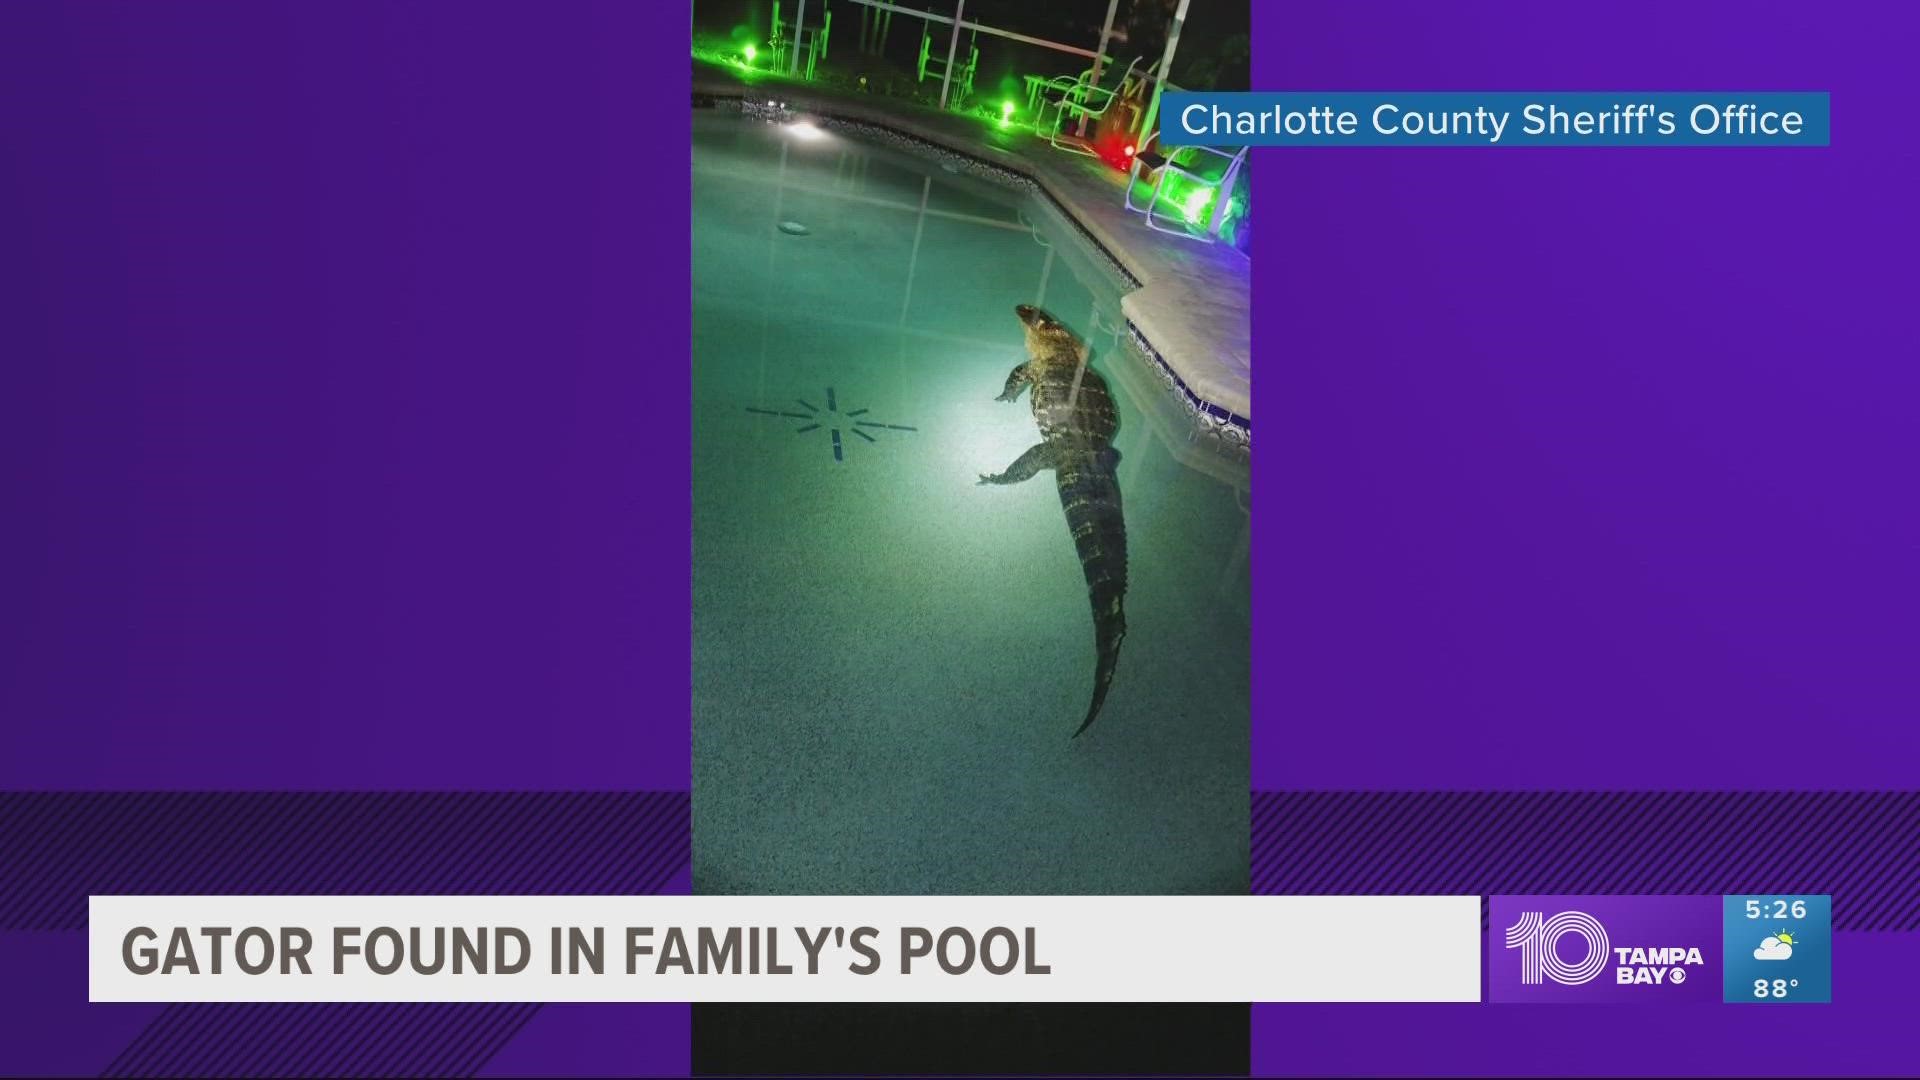 One family in Charlotte County woke up to some loud noises on their lanai and walked outside to find an unexpected guest taking a dip in their pool.